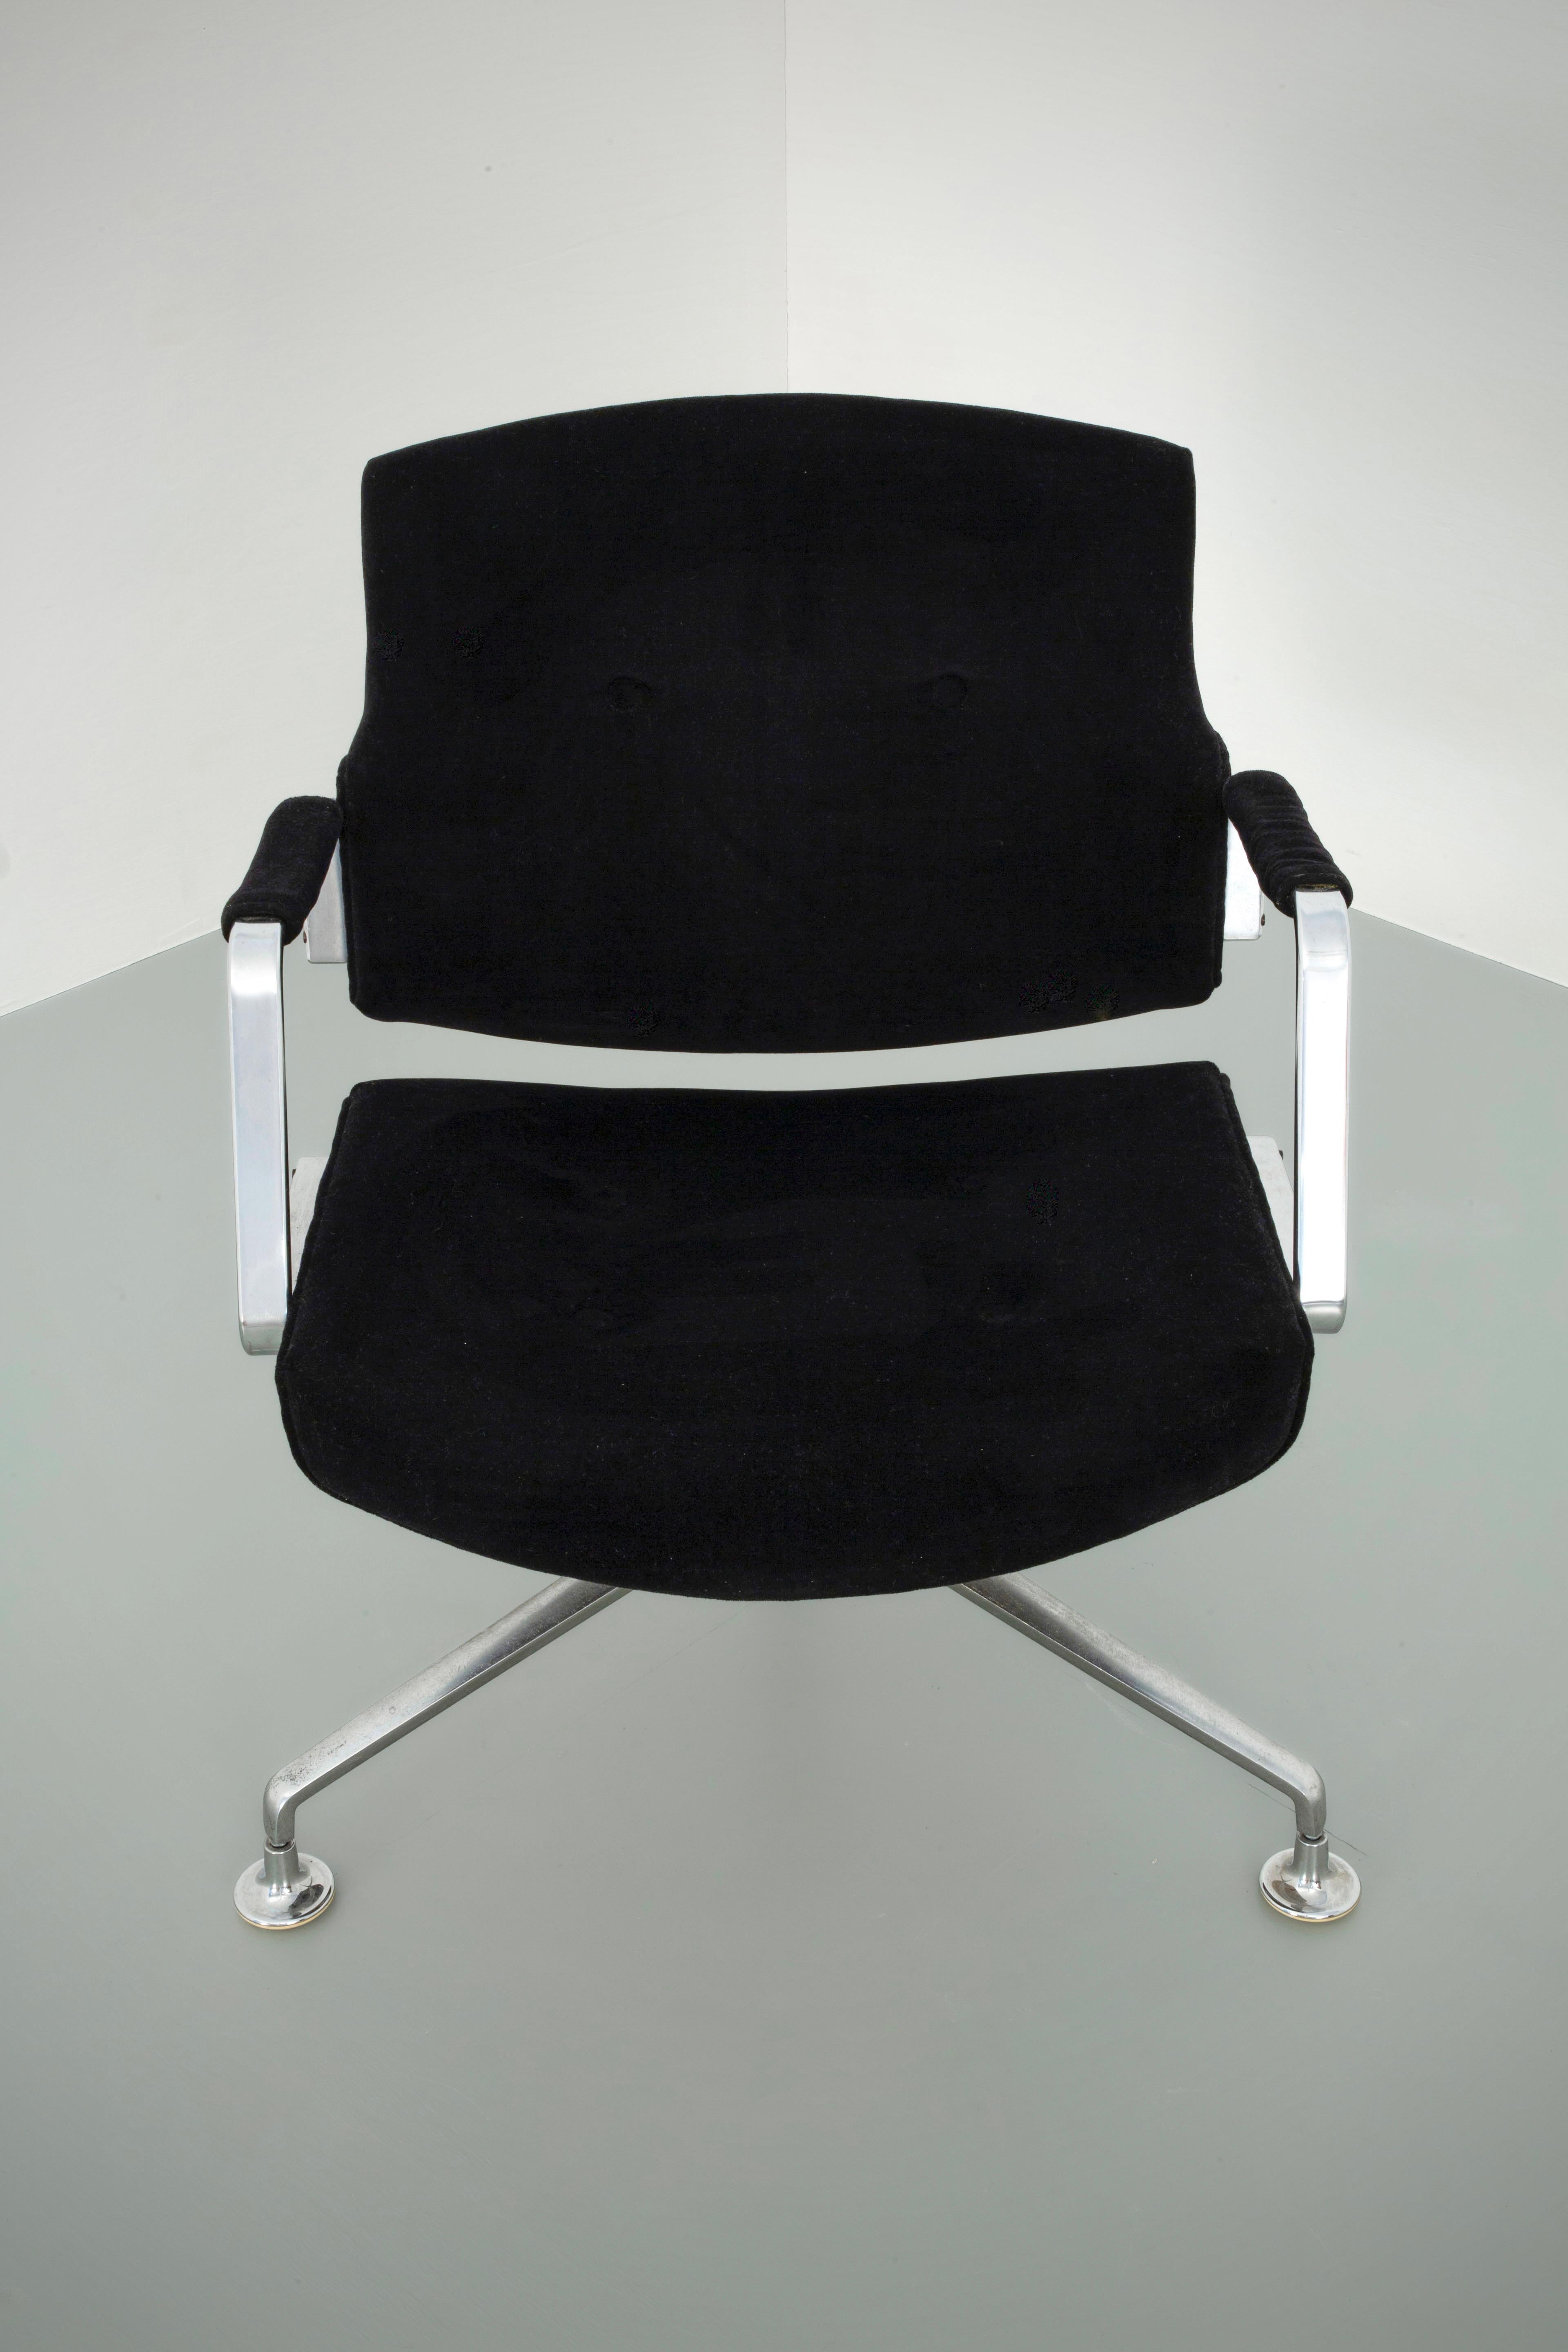 Metal Set of 4 FK 84 Armchairs by Fabricius and Kastholm for Kill Int., Denmark, 1962 For Sale